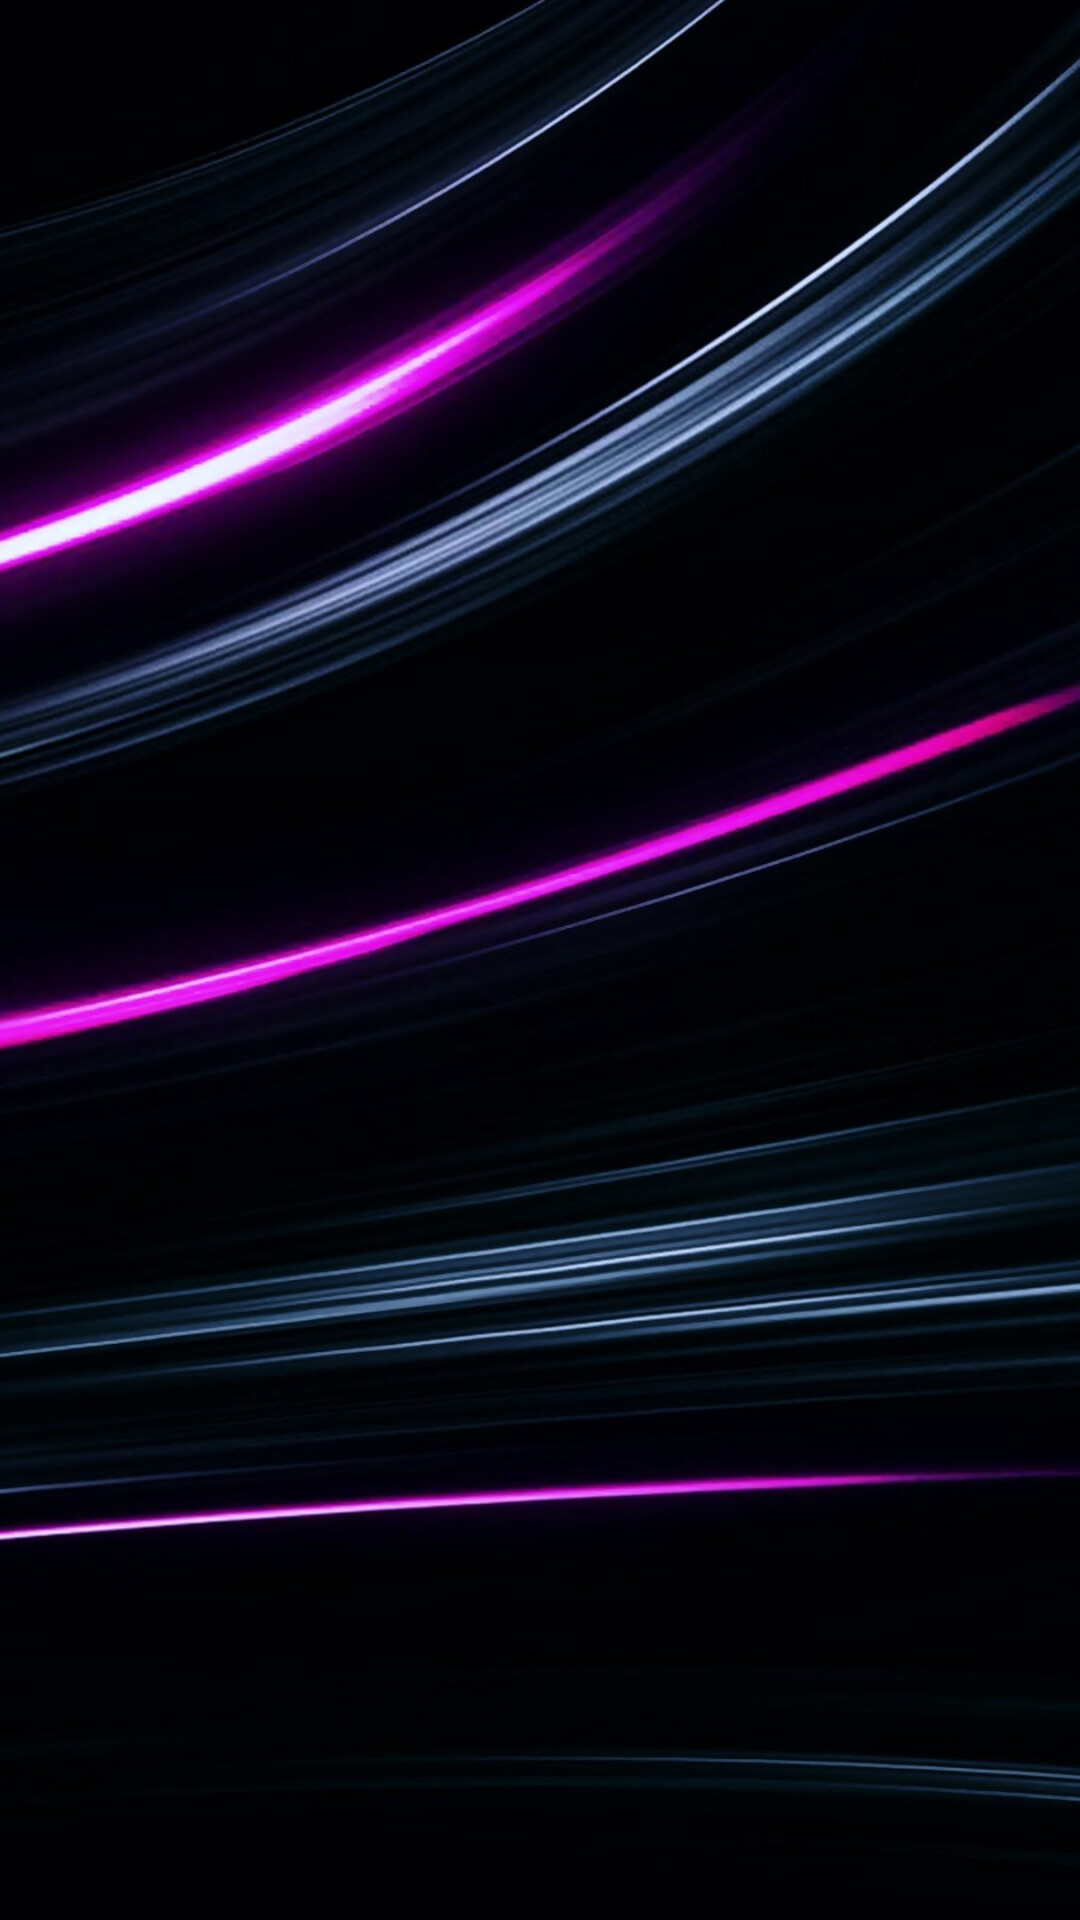 Glow in the Dark: Visual effect lighting, Abstract, Glowing lines. 1080x1920 Full HD Wallpaper.